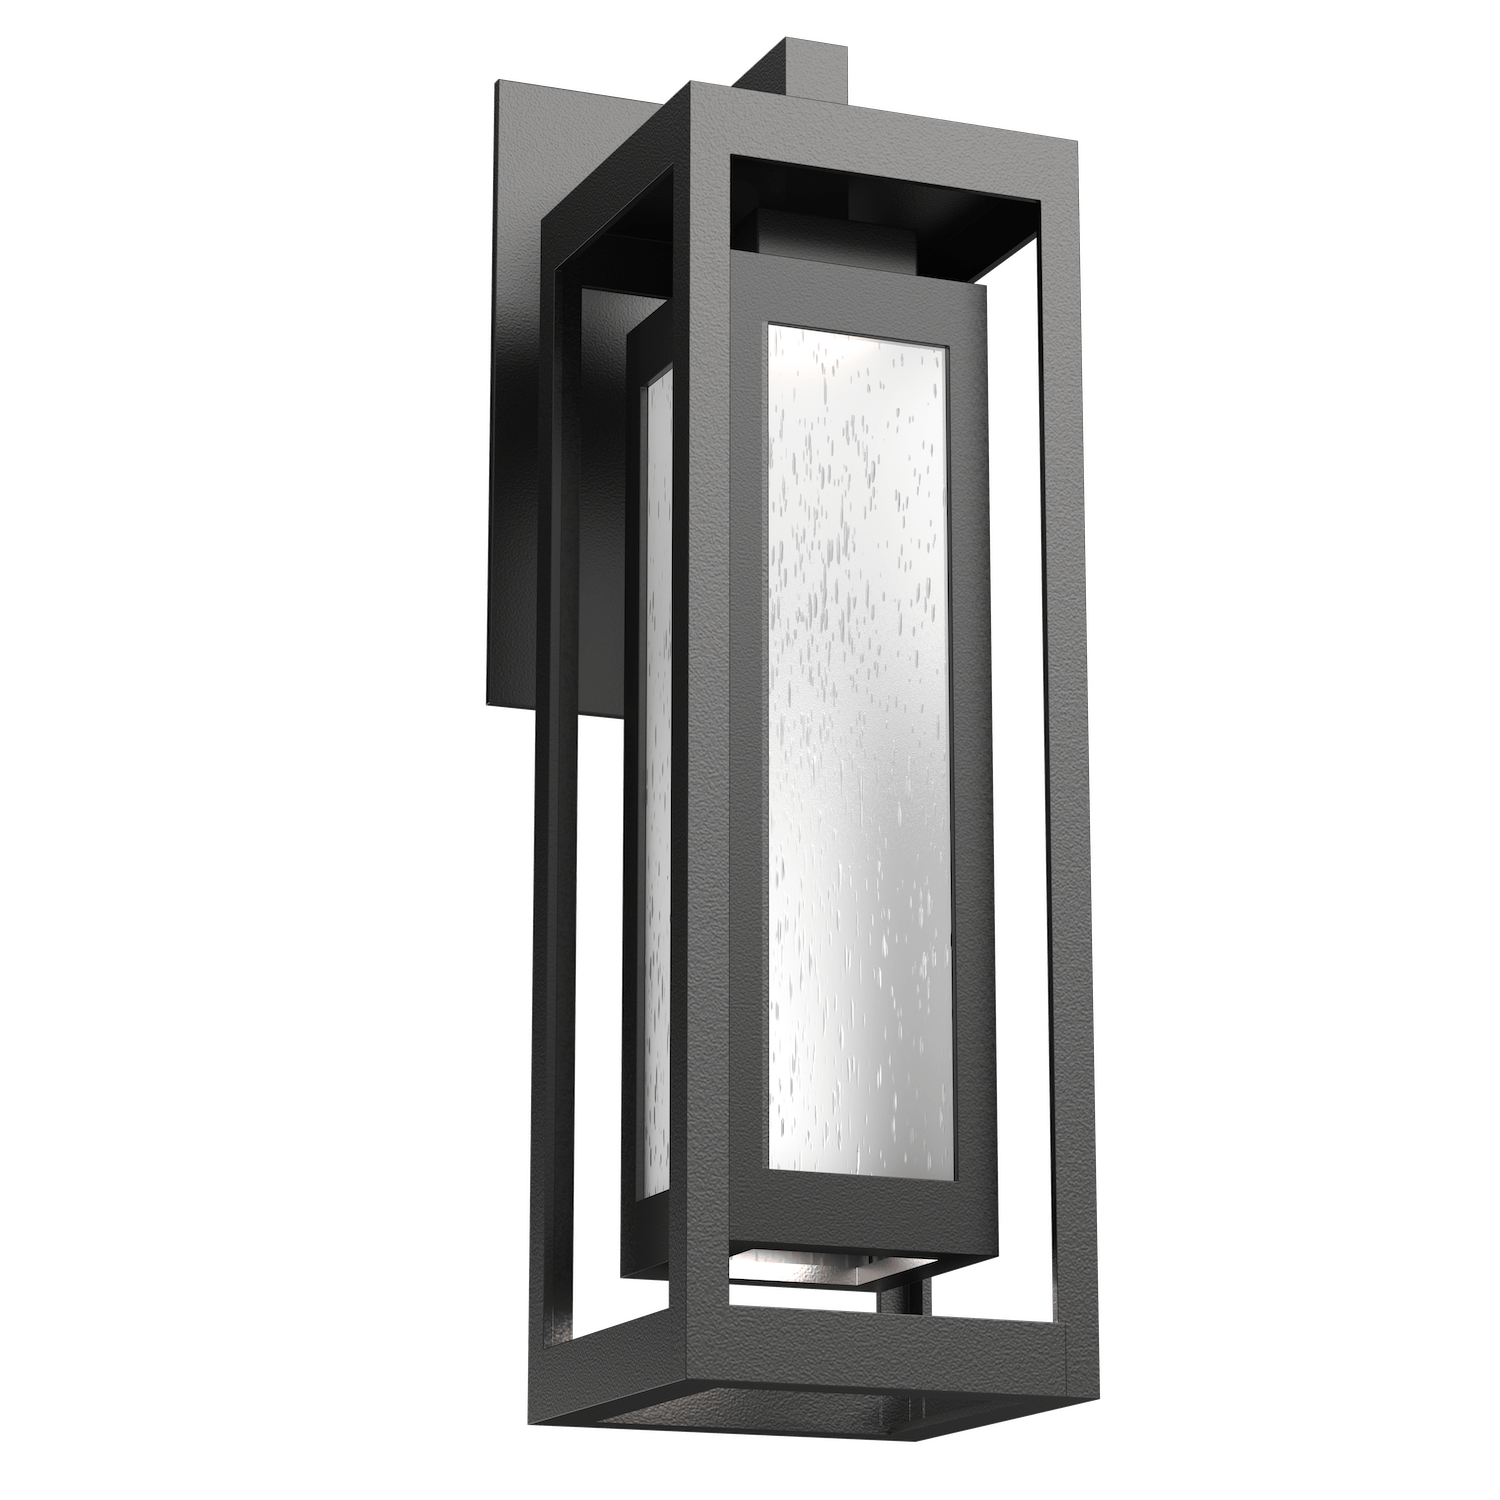 ODB0027-20-AG-F-Hammerton-Studio-Double-Box-21-inch-outdoor-sconce-with-argento-grey-finish-and-frosted-glass-shade-and-LED-lamping